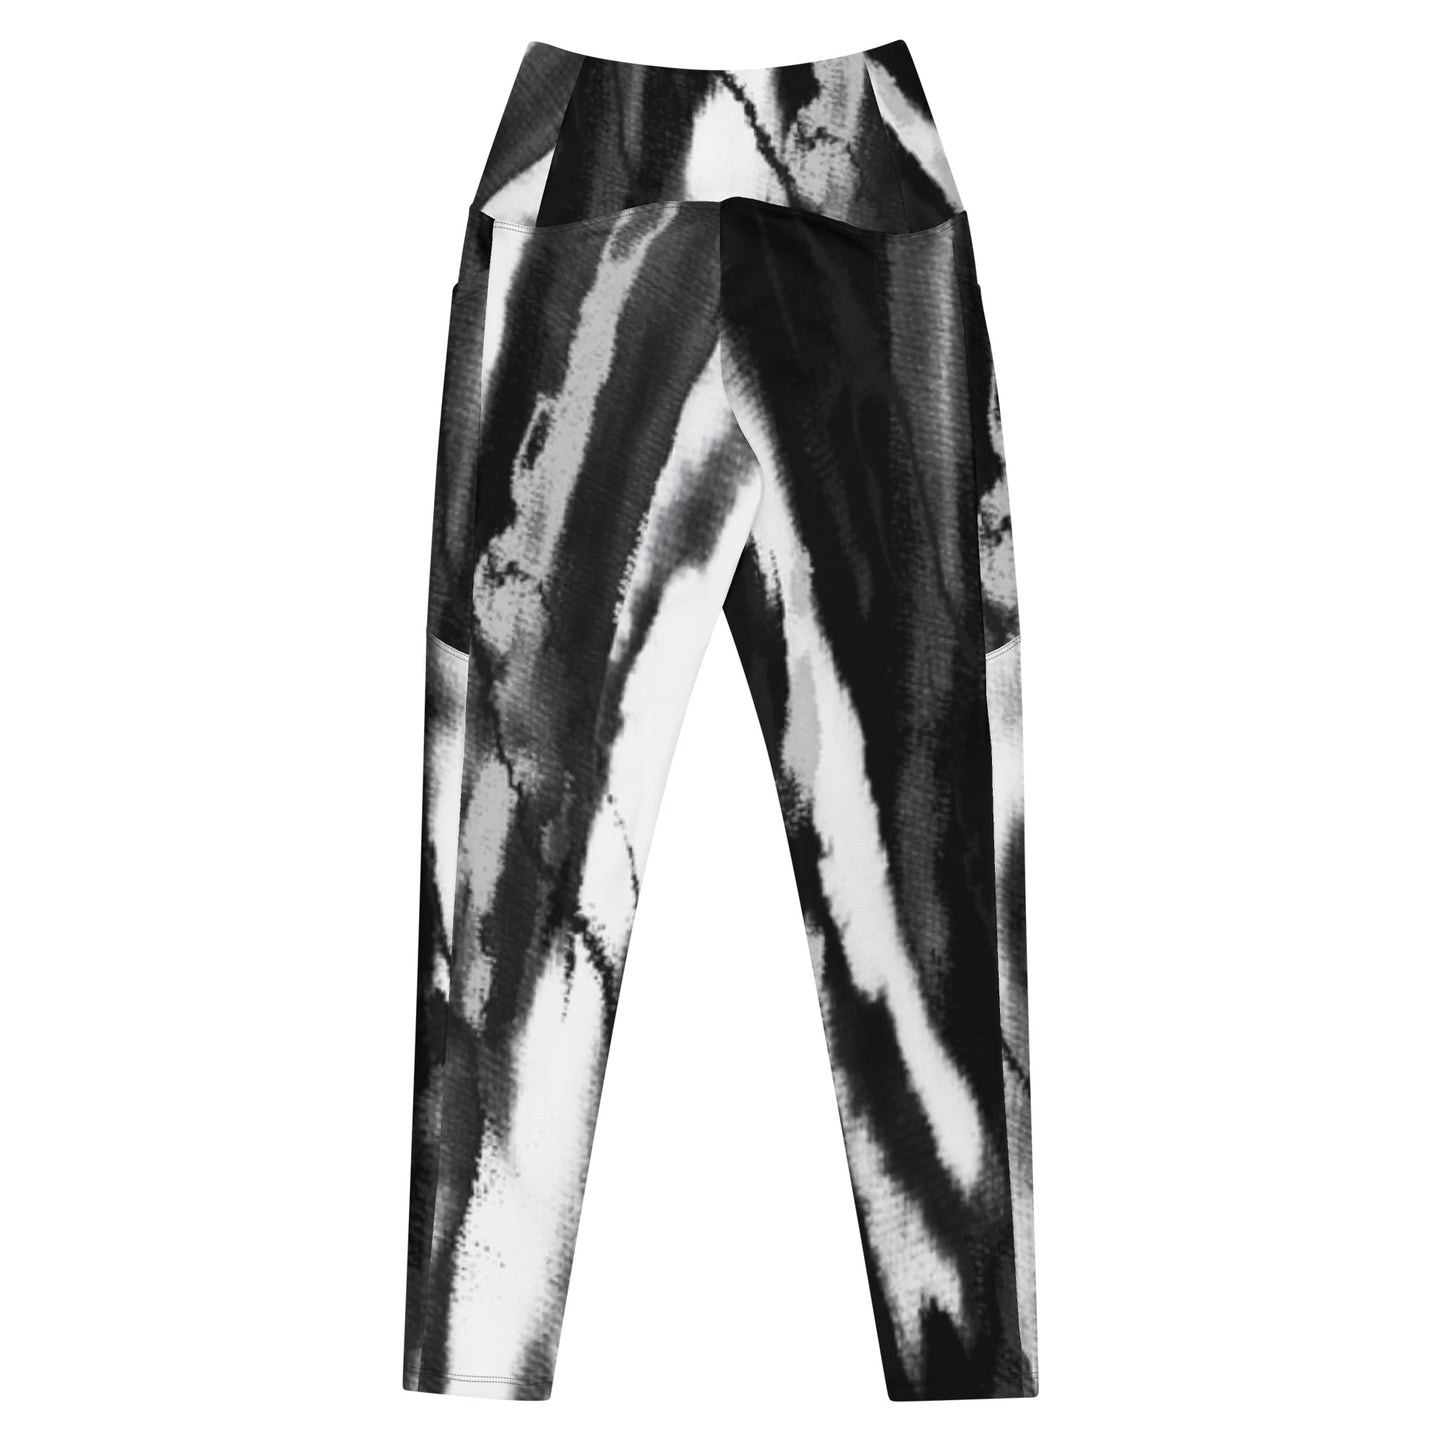 Blk/Wht Crossover leggings with pockets